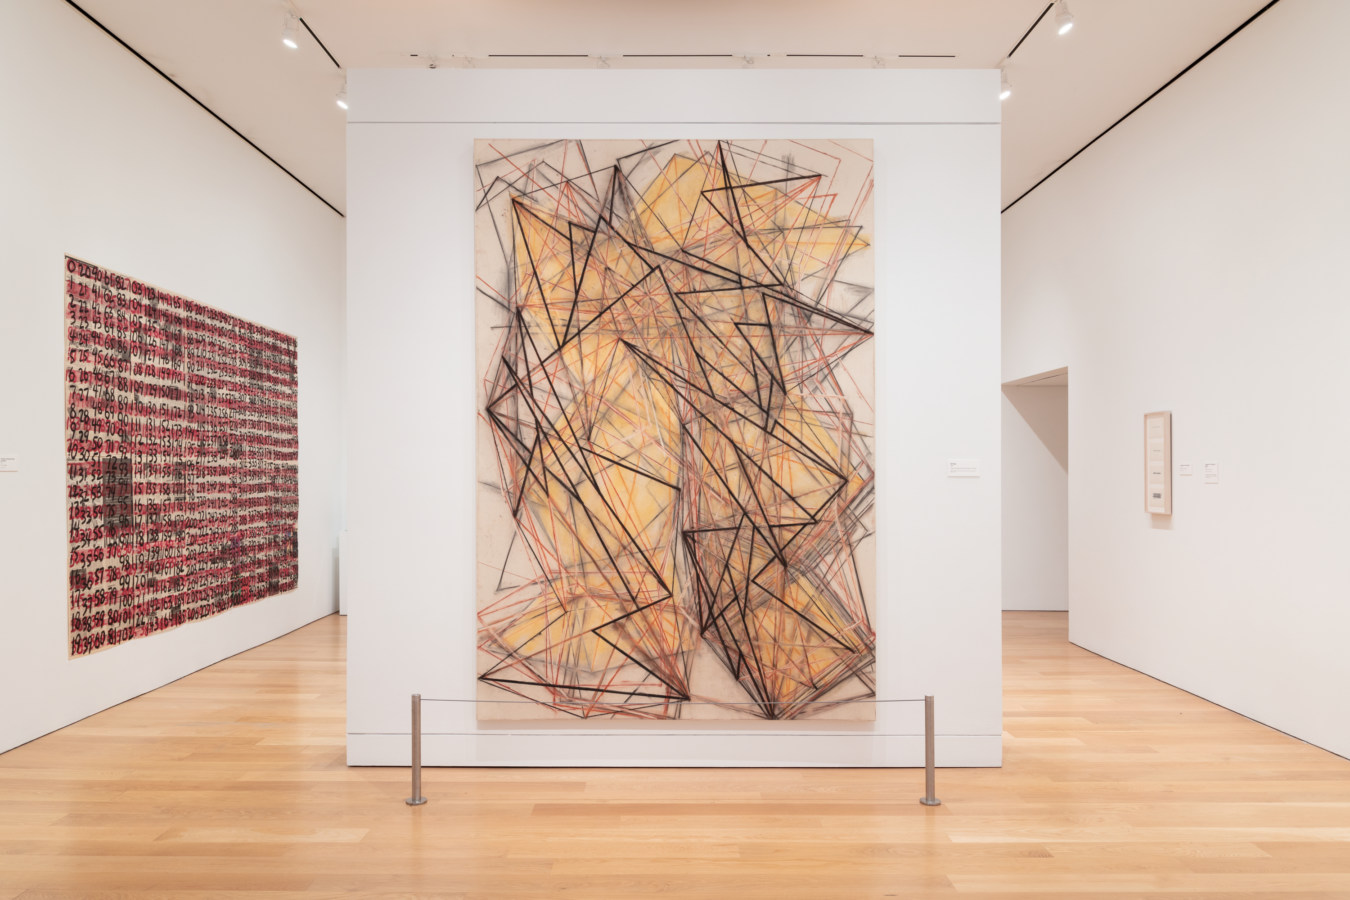 Color photograph of an art gallery interior, with two large abstract works visible.